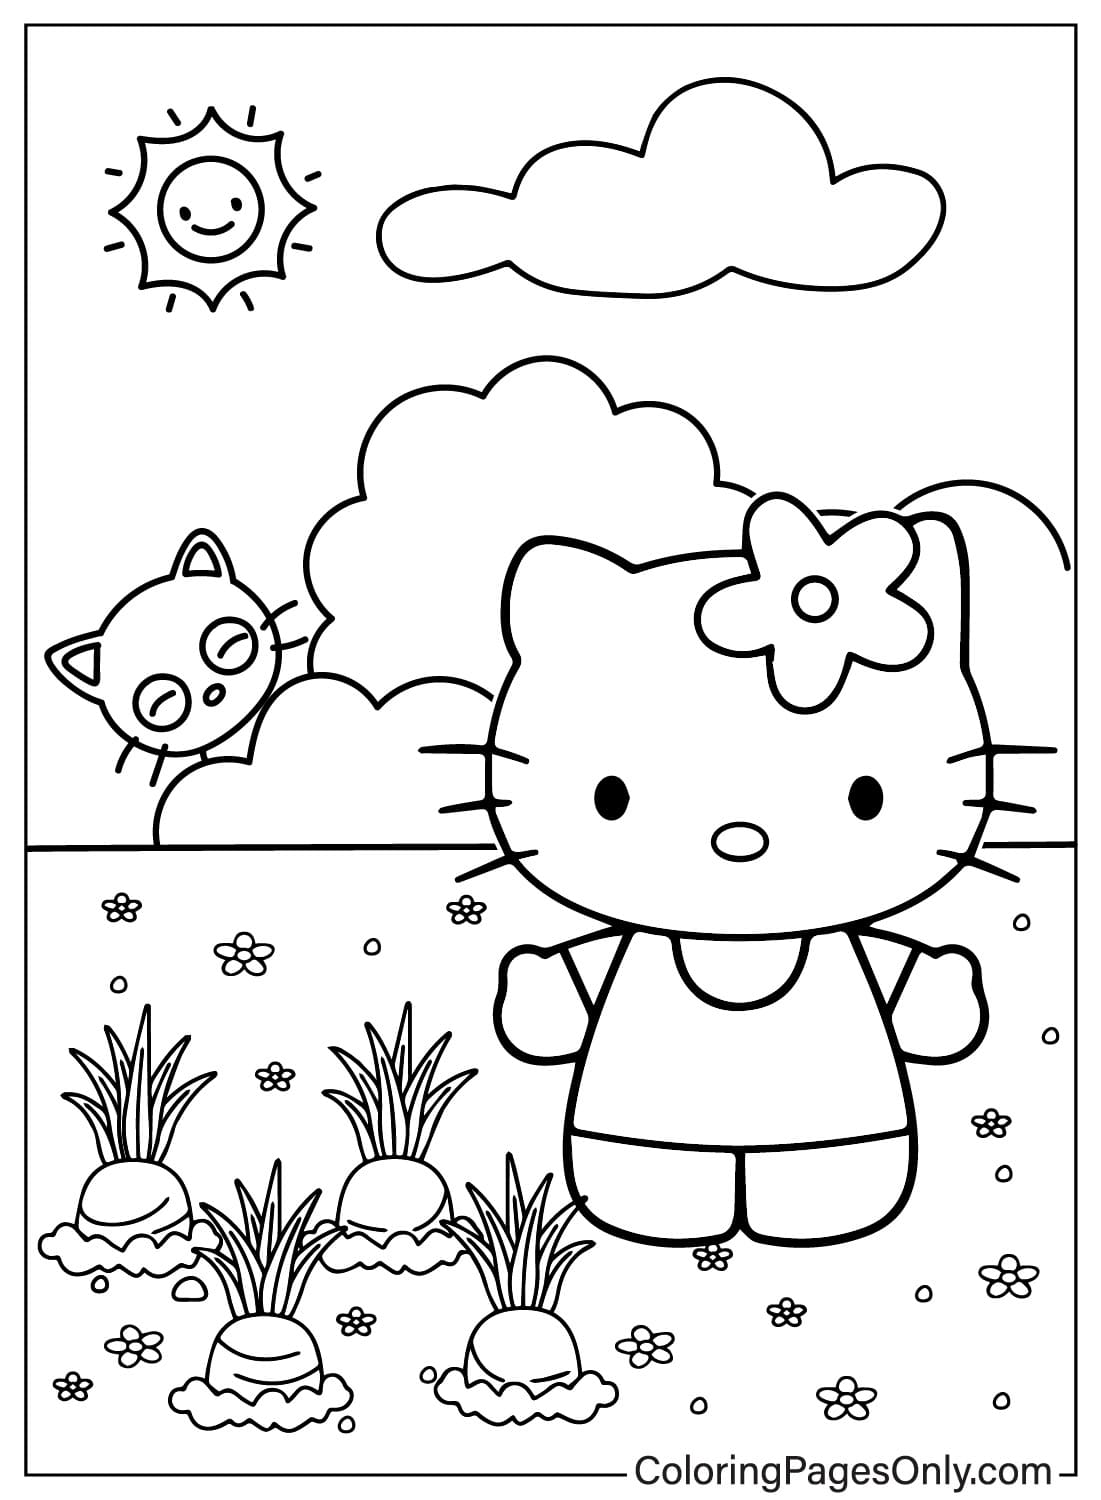 Chococat and Hello Kitty to Color Coloring Page